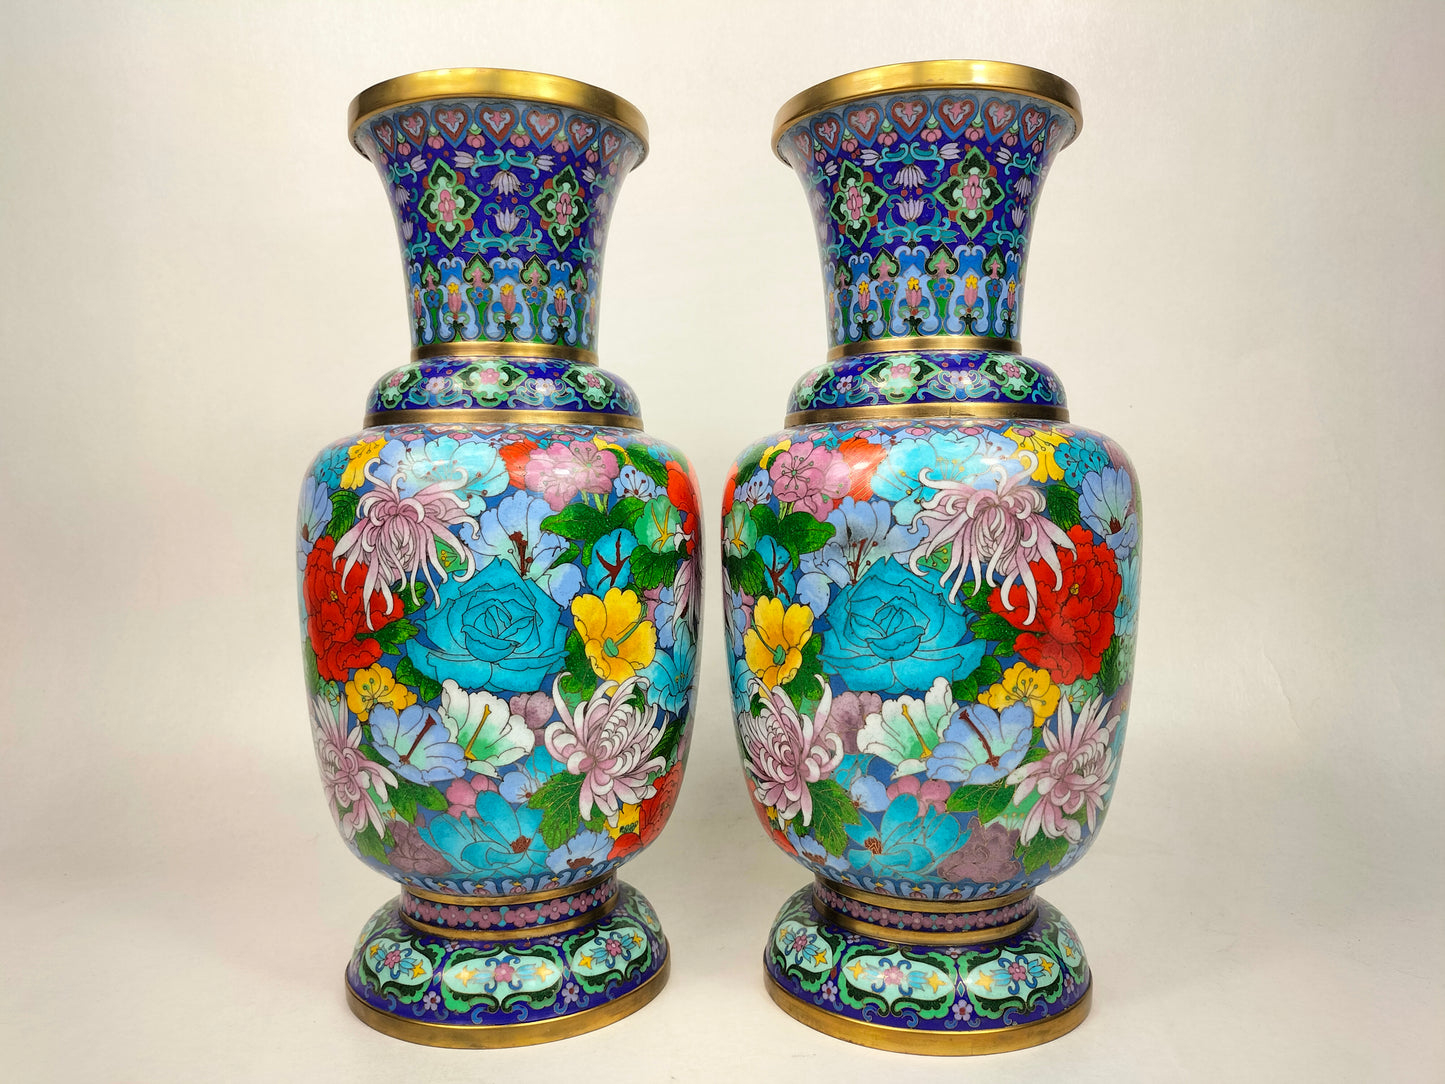 Pair of large Chinese cloisonne millefleur vases // 20th century